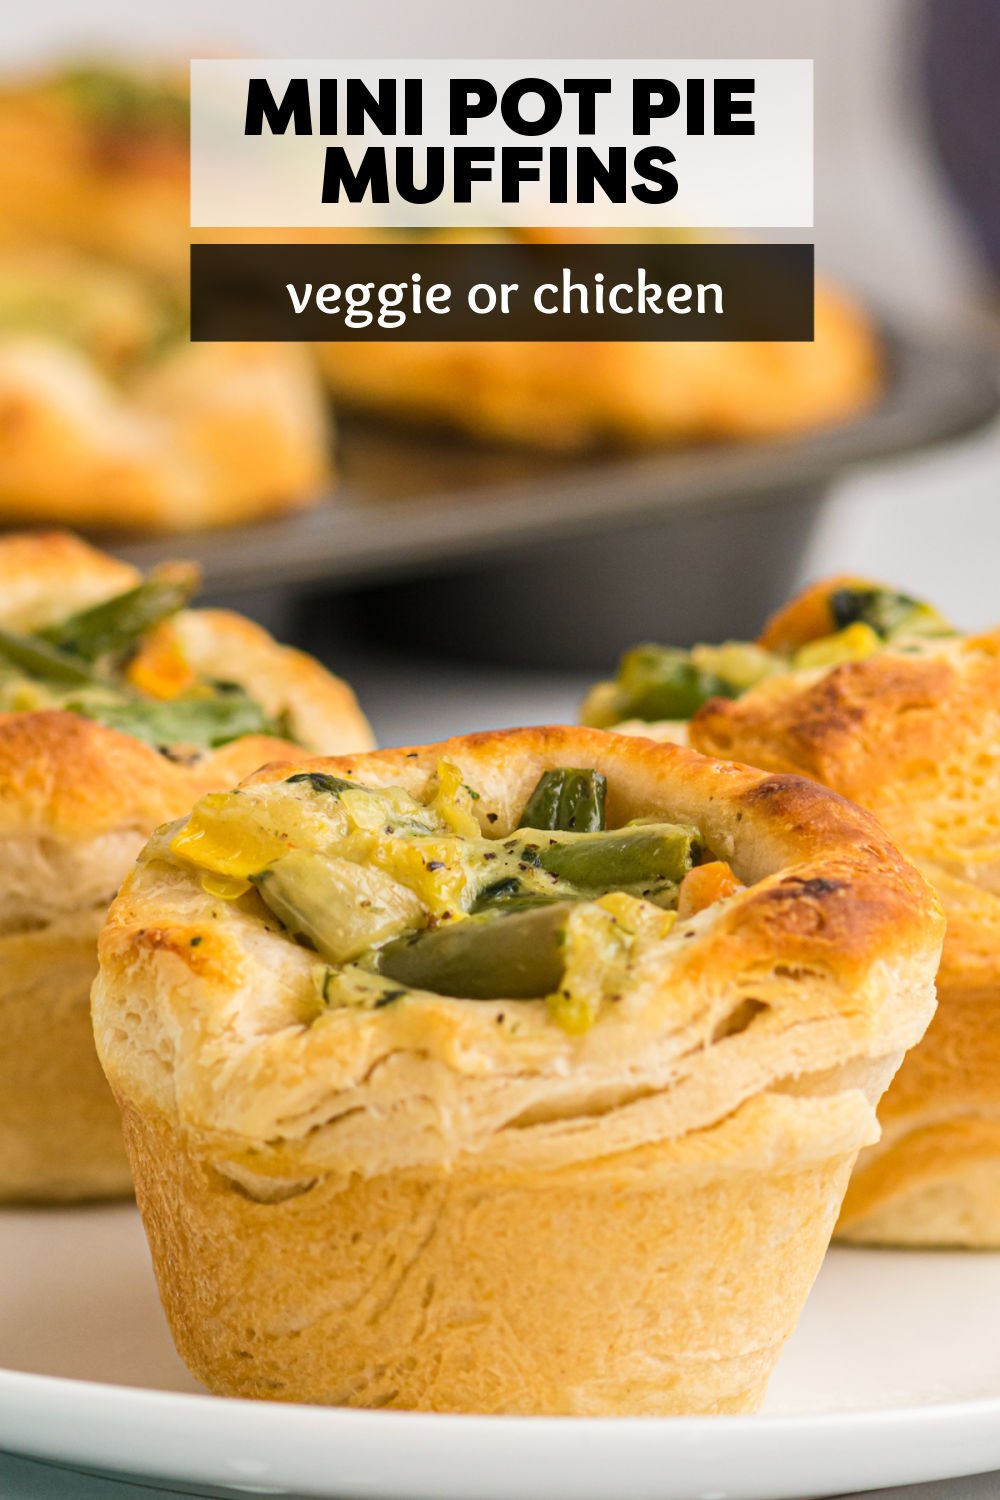 Semi-homemade Mini Pot Pies are a fun and easy way to serve dinner. Canned biscuits are used as the crust and filled with veggies and/or chicken and baked in a muffin tin for handheld comfort food. | www.persnicketyplates.com